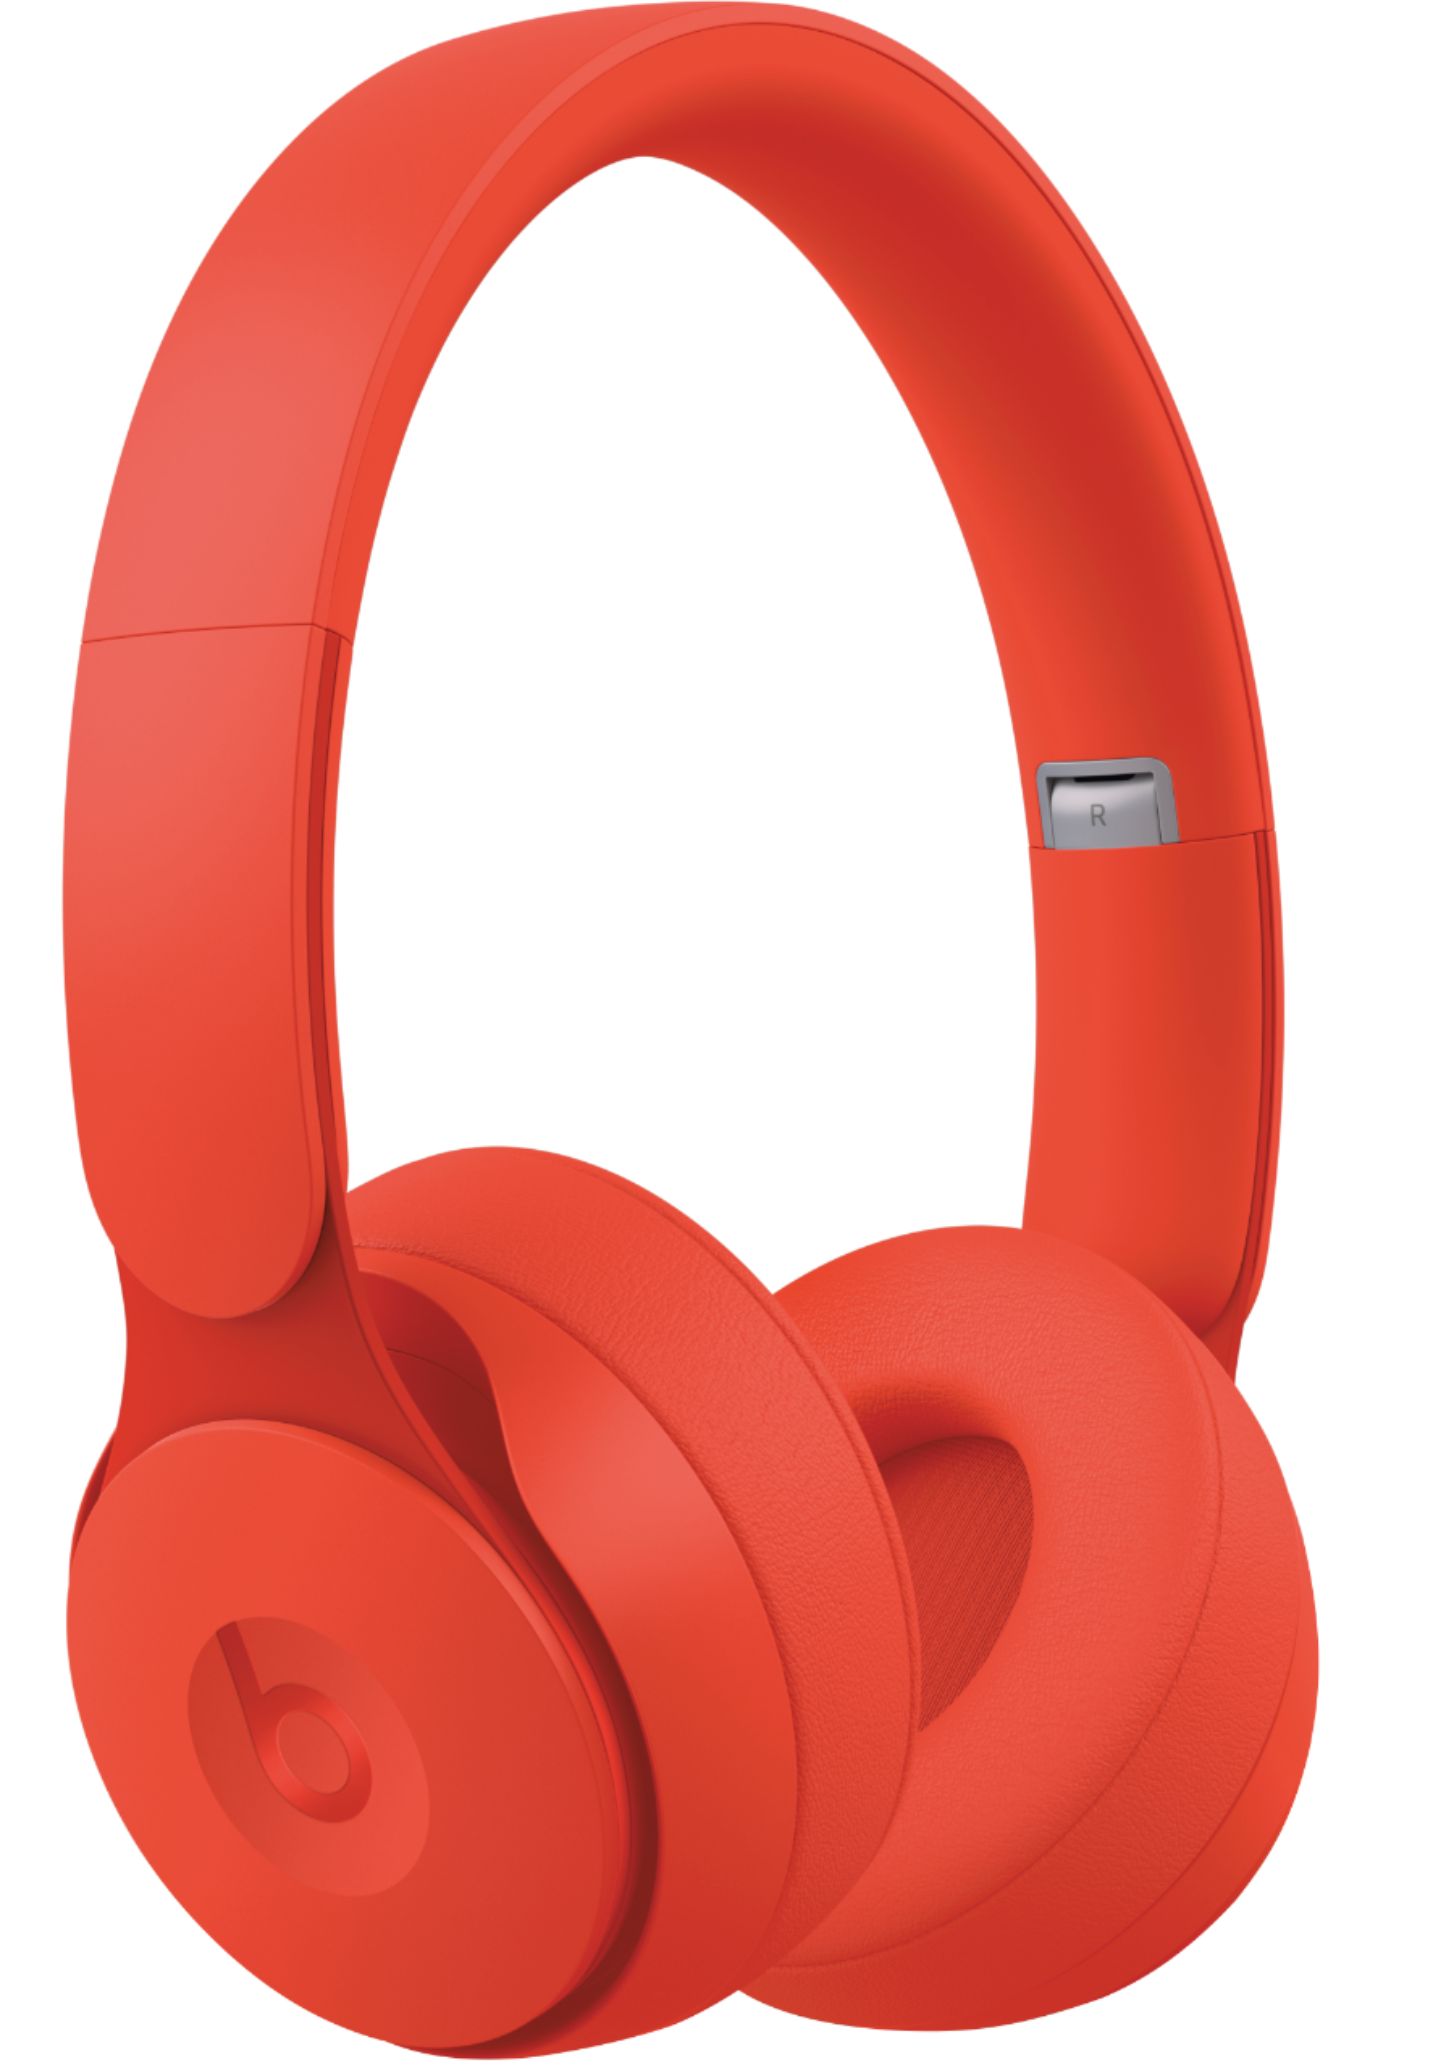 Beats by Dr. Dre Solo Pro More Matte Collection Wireless Cancelling On-Ear Headphones Red MRJC2LL/A - Best Buy